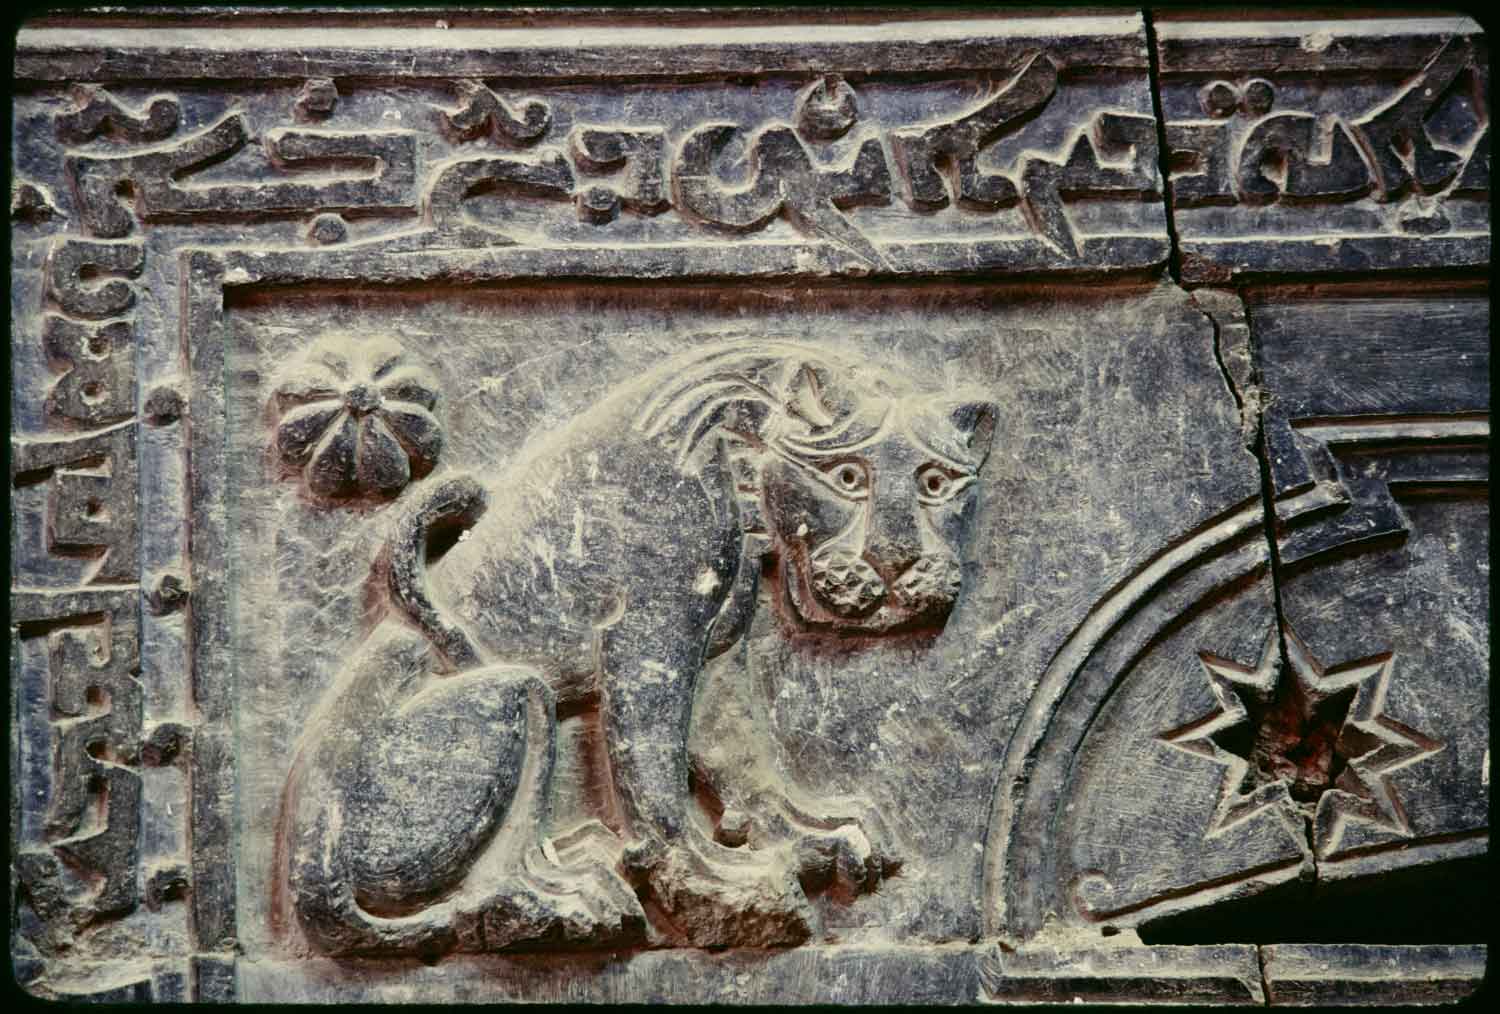 Monastic church, detail of lion carving on the northern exterior gate.